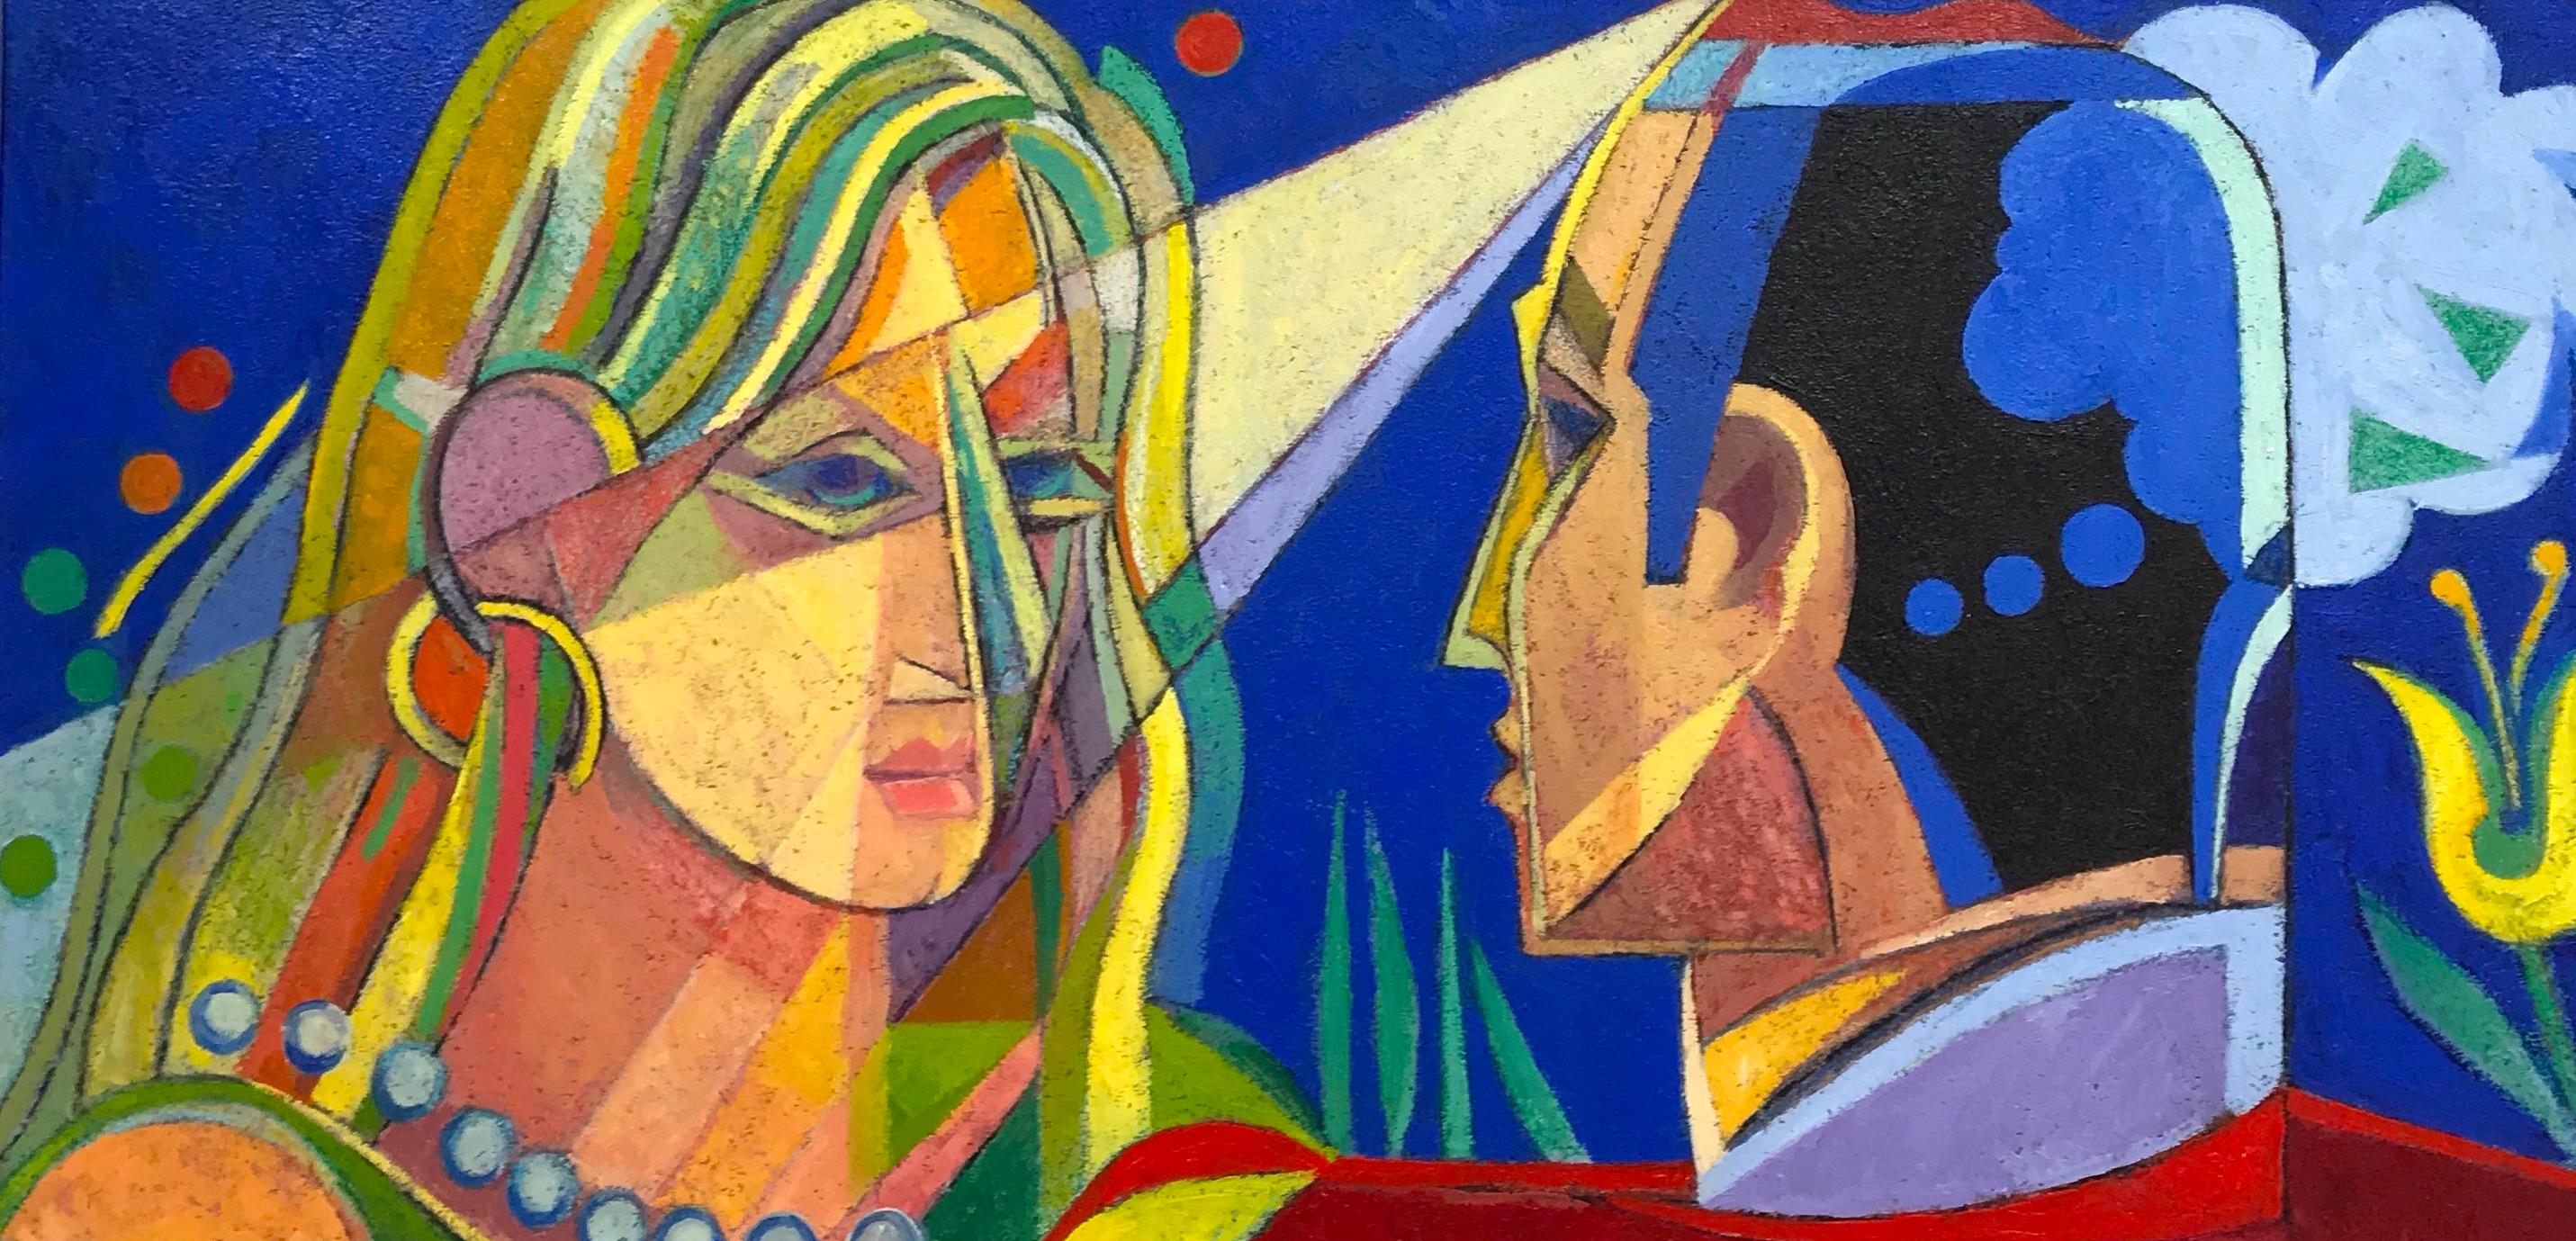 Giancarlo Impiglia Abstract Painting - Cubist painting, art deco, modern geometric work "A Chance Encounter"